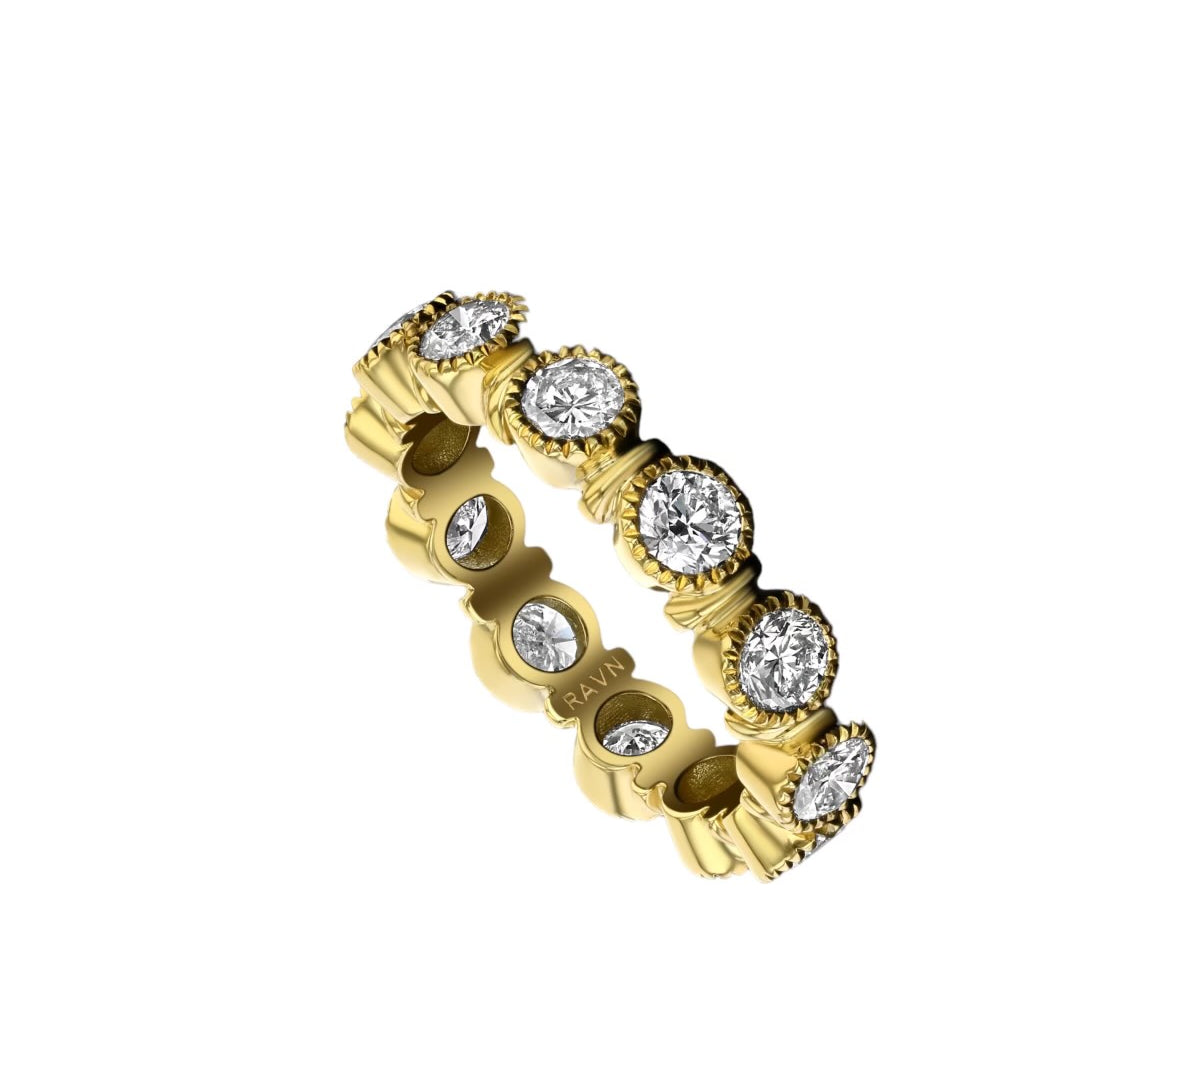 Milgrain Eternity Band Ring, Yellow Gold and Diamond Band Ring House of RAVN   